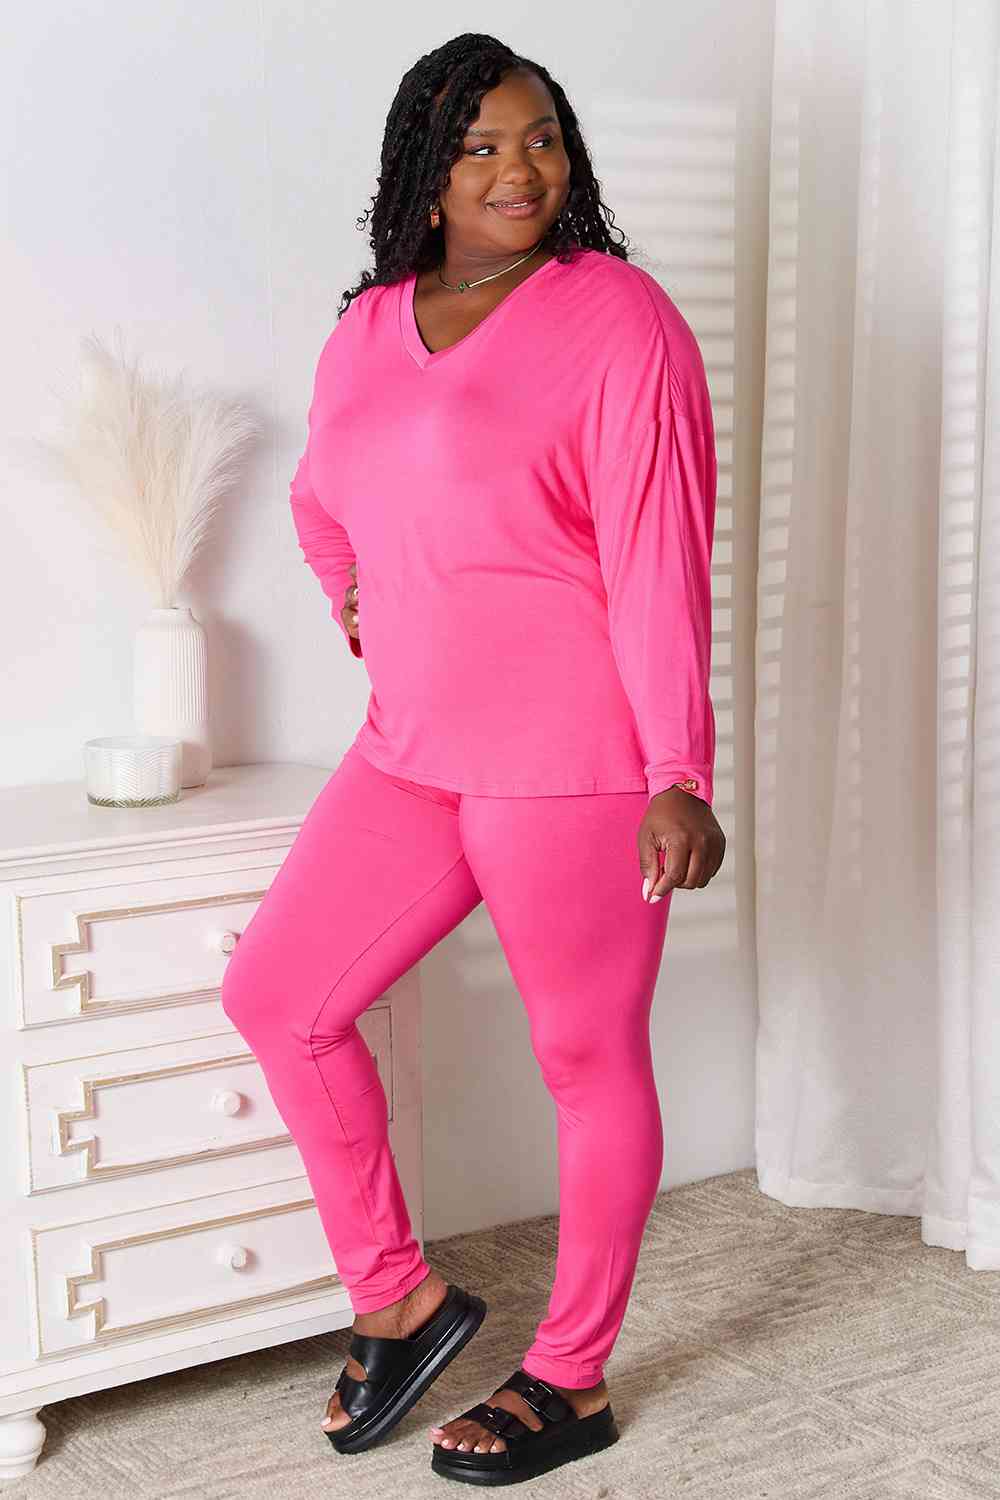 V-Neck Soft Rayon Long Sleeve Top and Pants Lounge Set - Bottoms - Outfit Sets - 6 - 2024